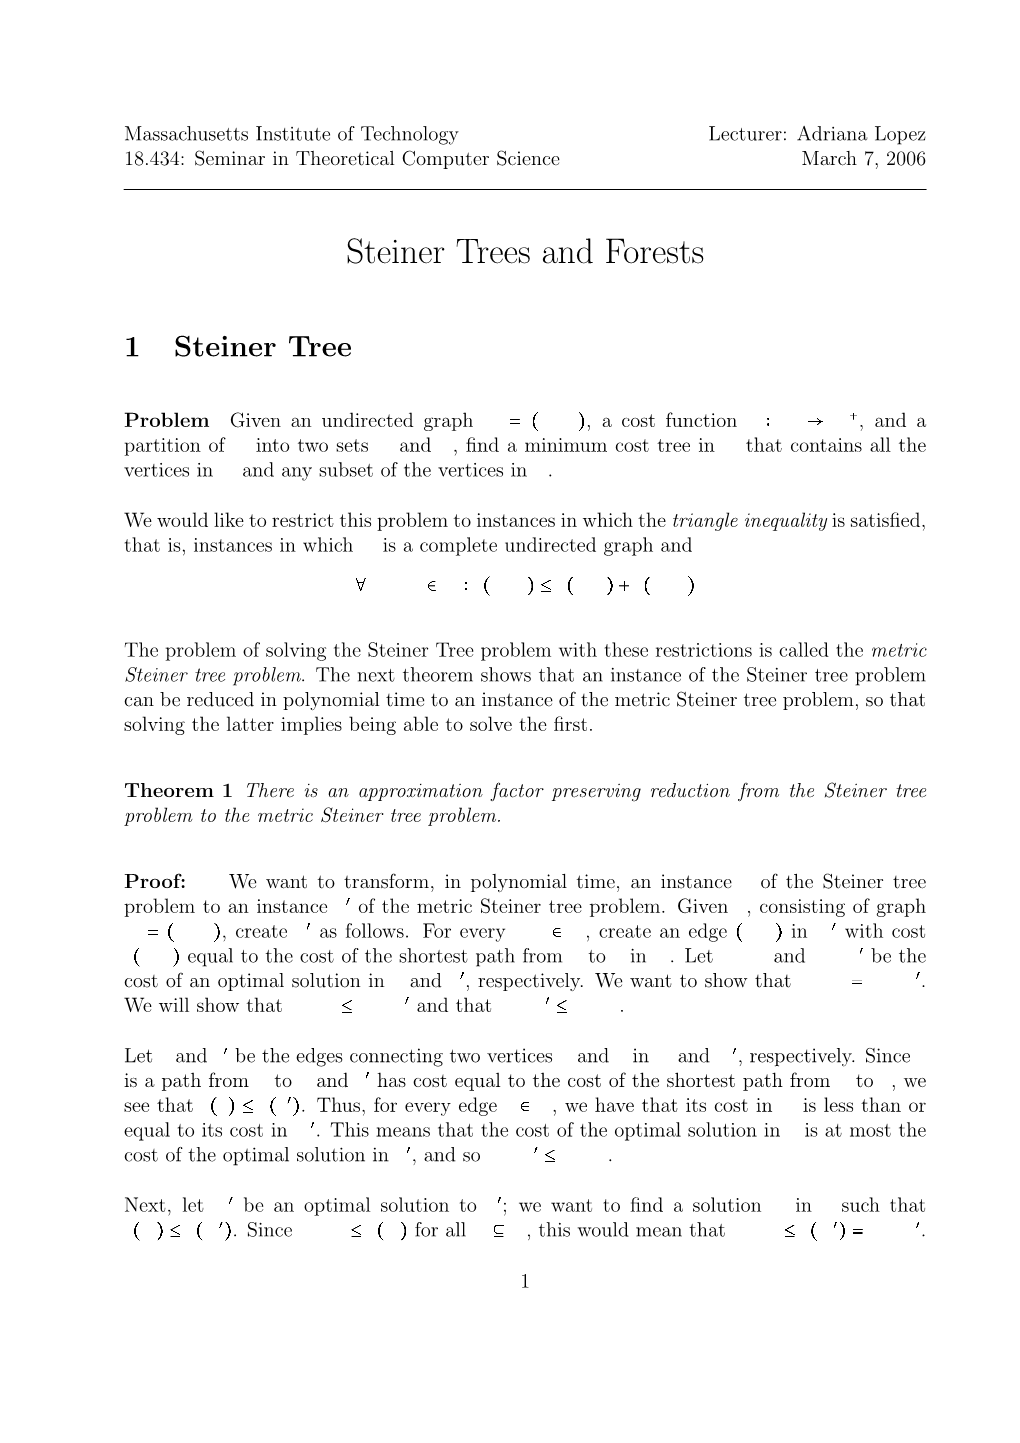 Steiner Trees and Forests